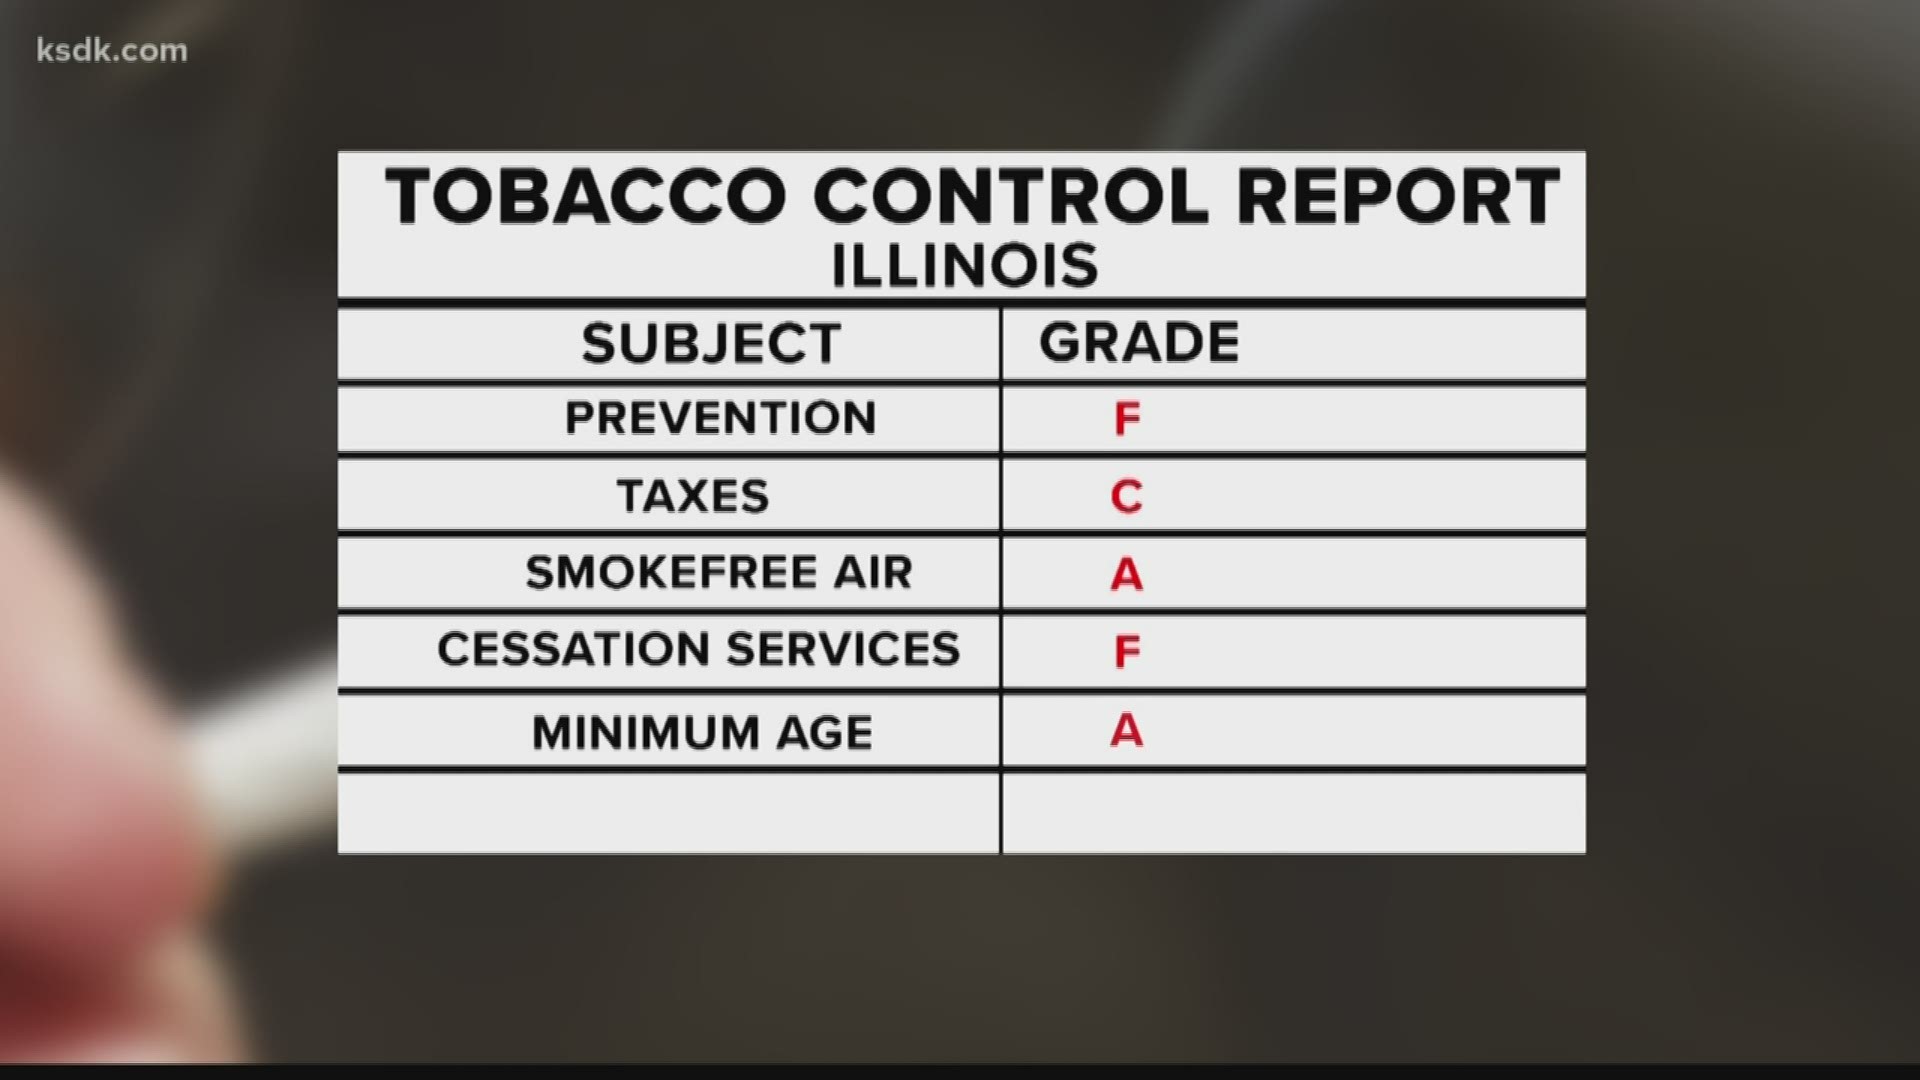 Missouri got four failing grades in this year's tobacco control report